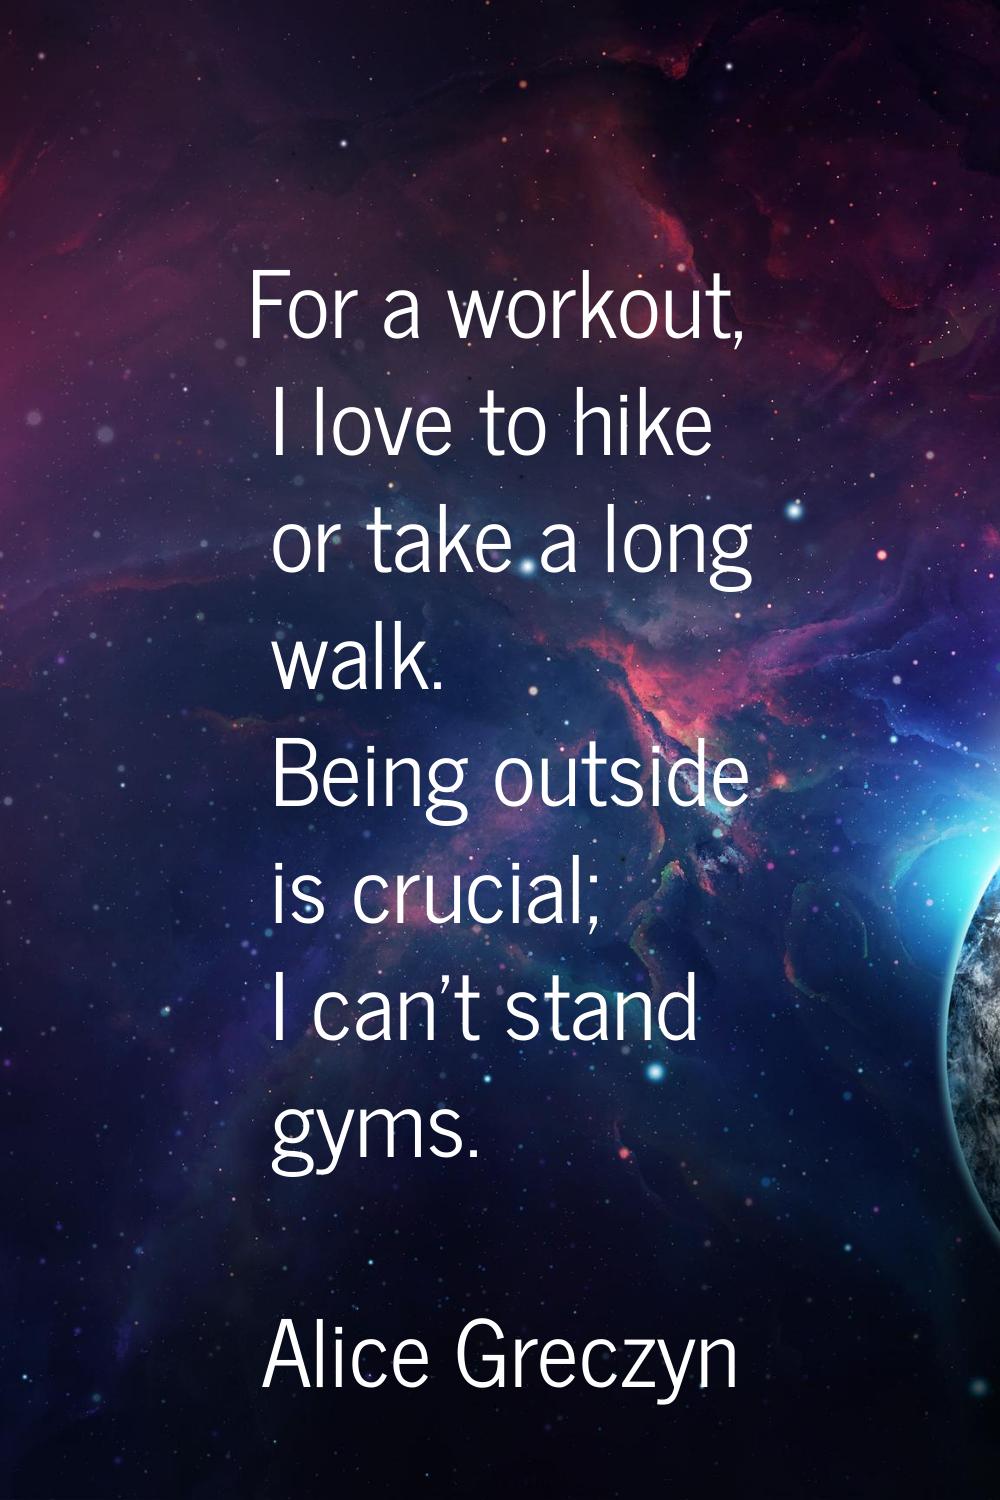 For a workout, I love to hike or take a long walk. Being outside is crucial; I can't stand gyms.